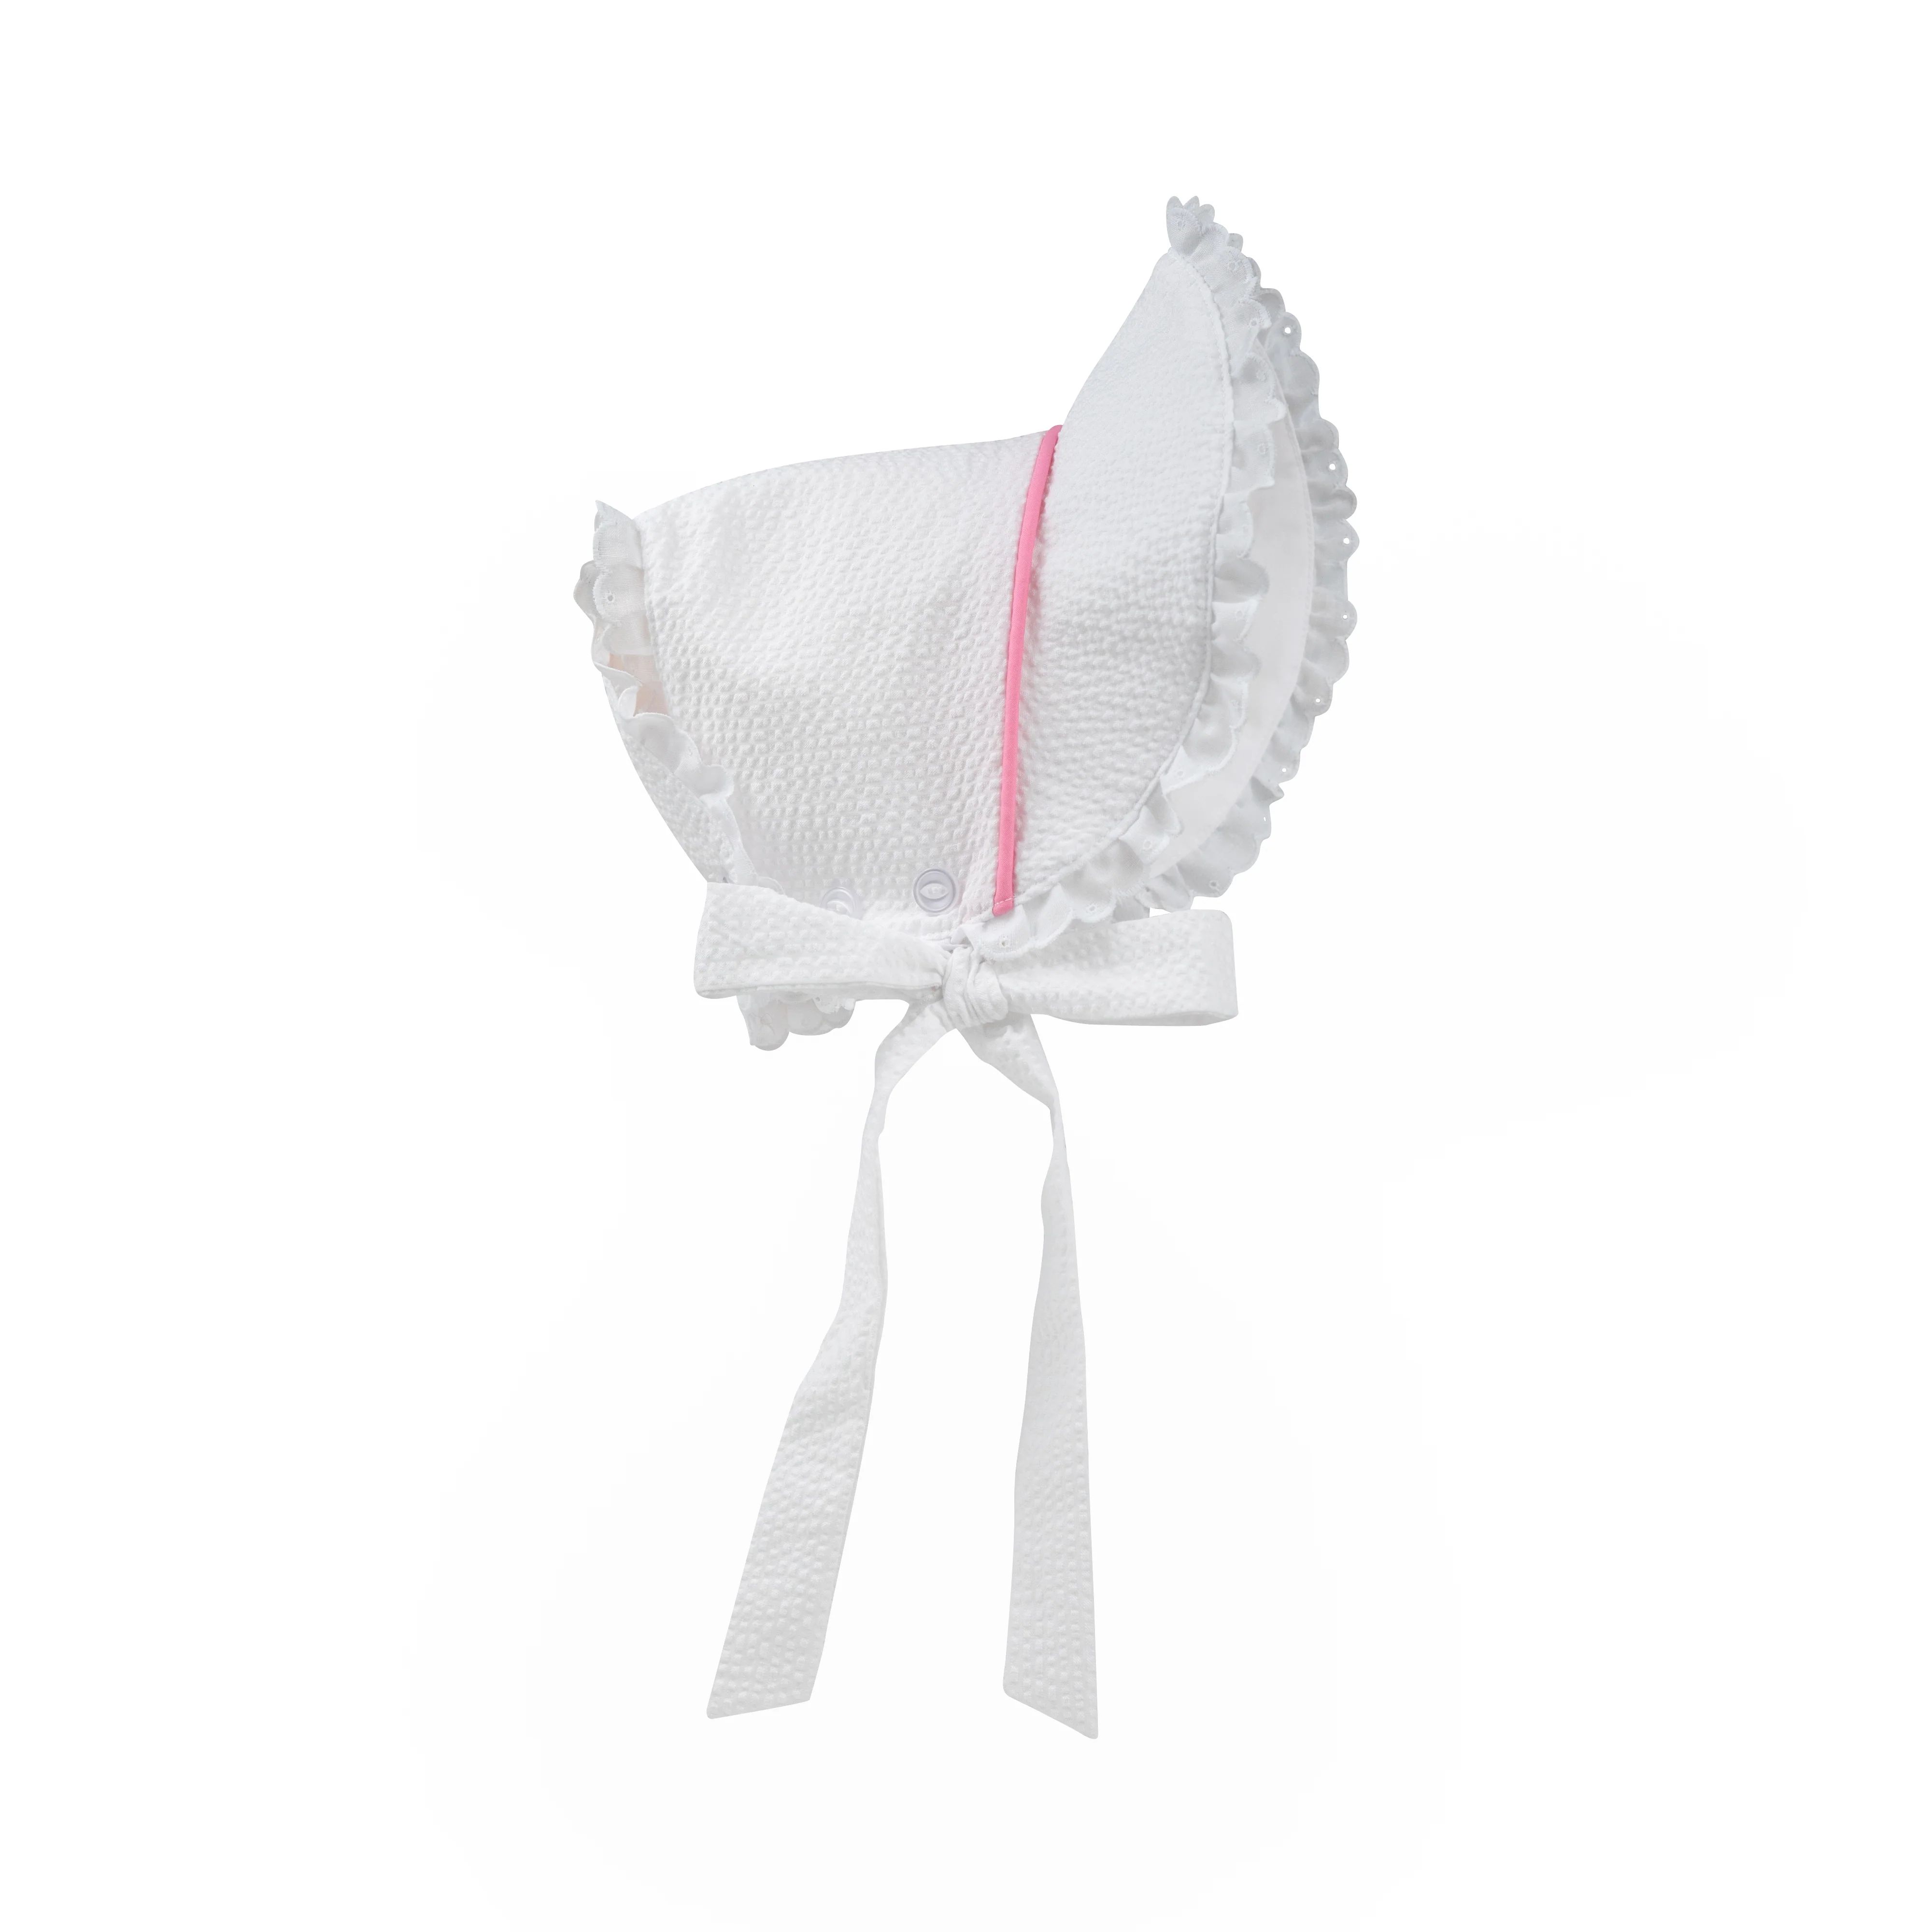 Catesby Country Club Bonnet - Worth Ave White Seersucker with Hamptons Hot Pink & White Eyelet | The Beaufort Bonnet Company